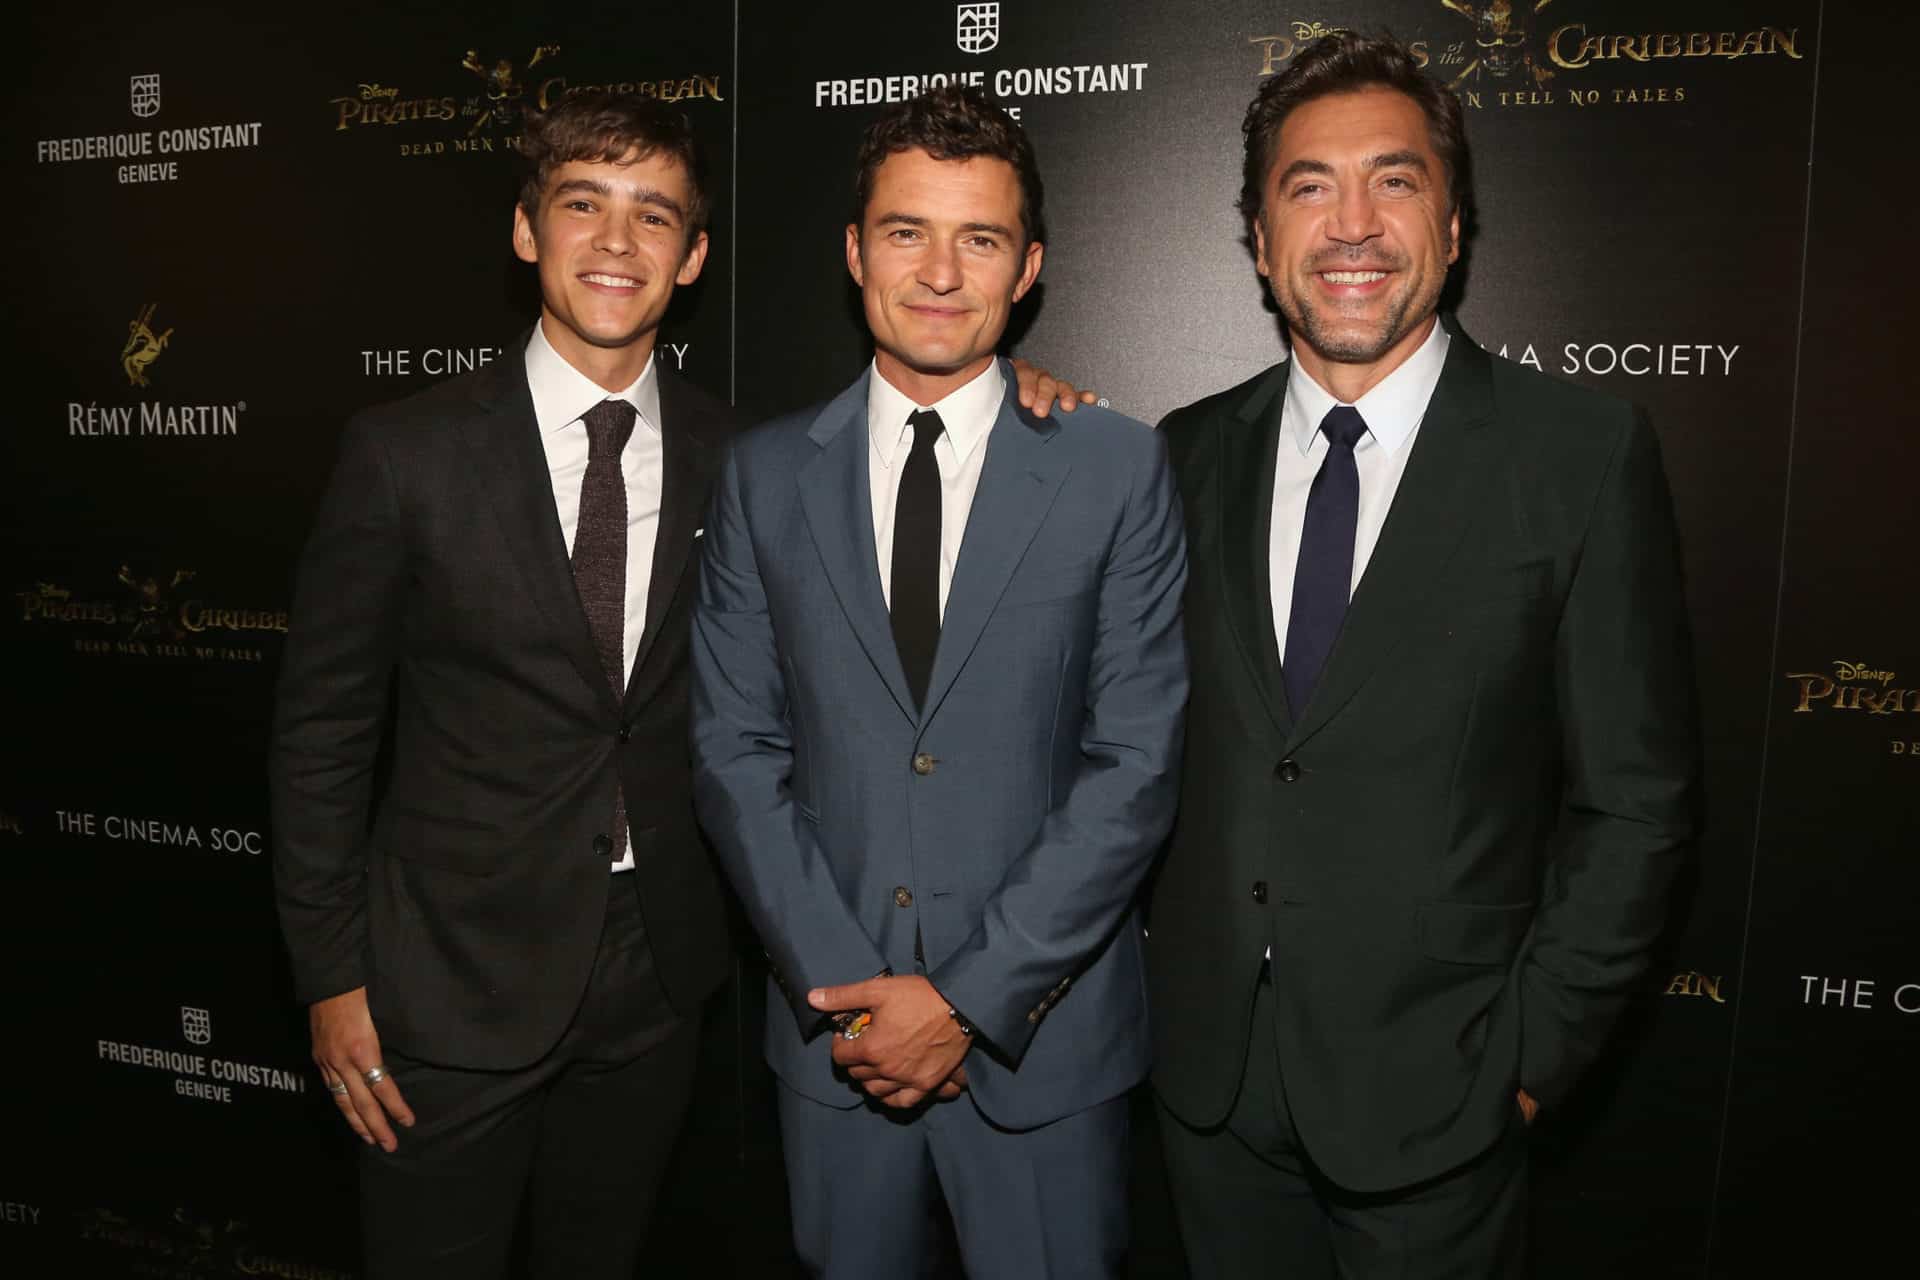 Frederique Constant Sponsors New York City Premiere Of Pirates of the Caribbean: Dead Men Tell No Tales